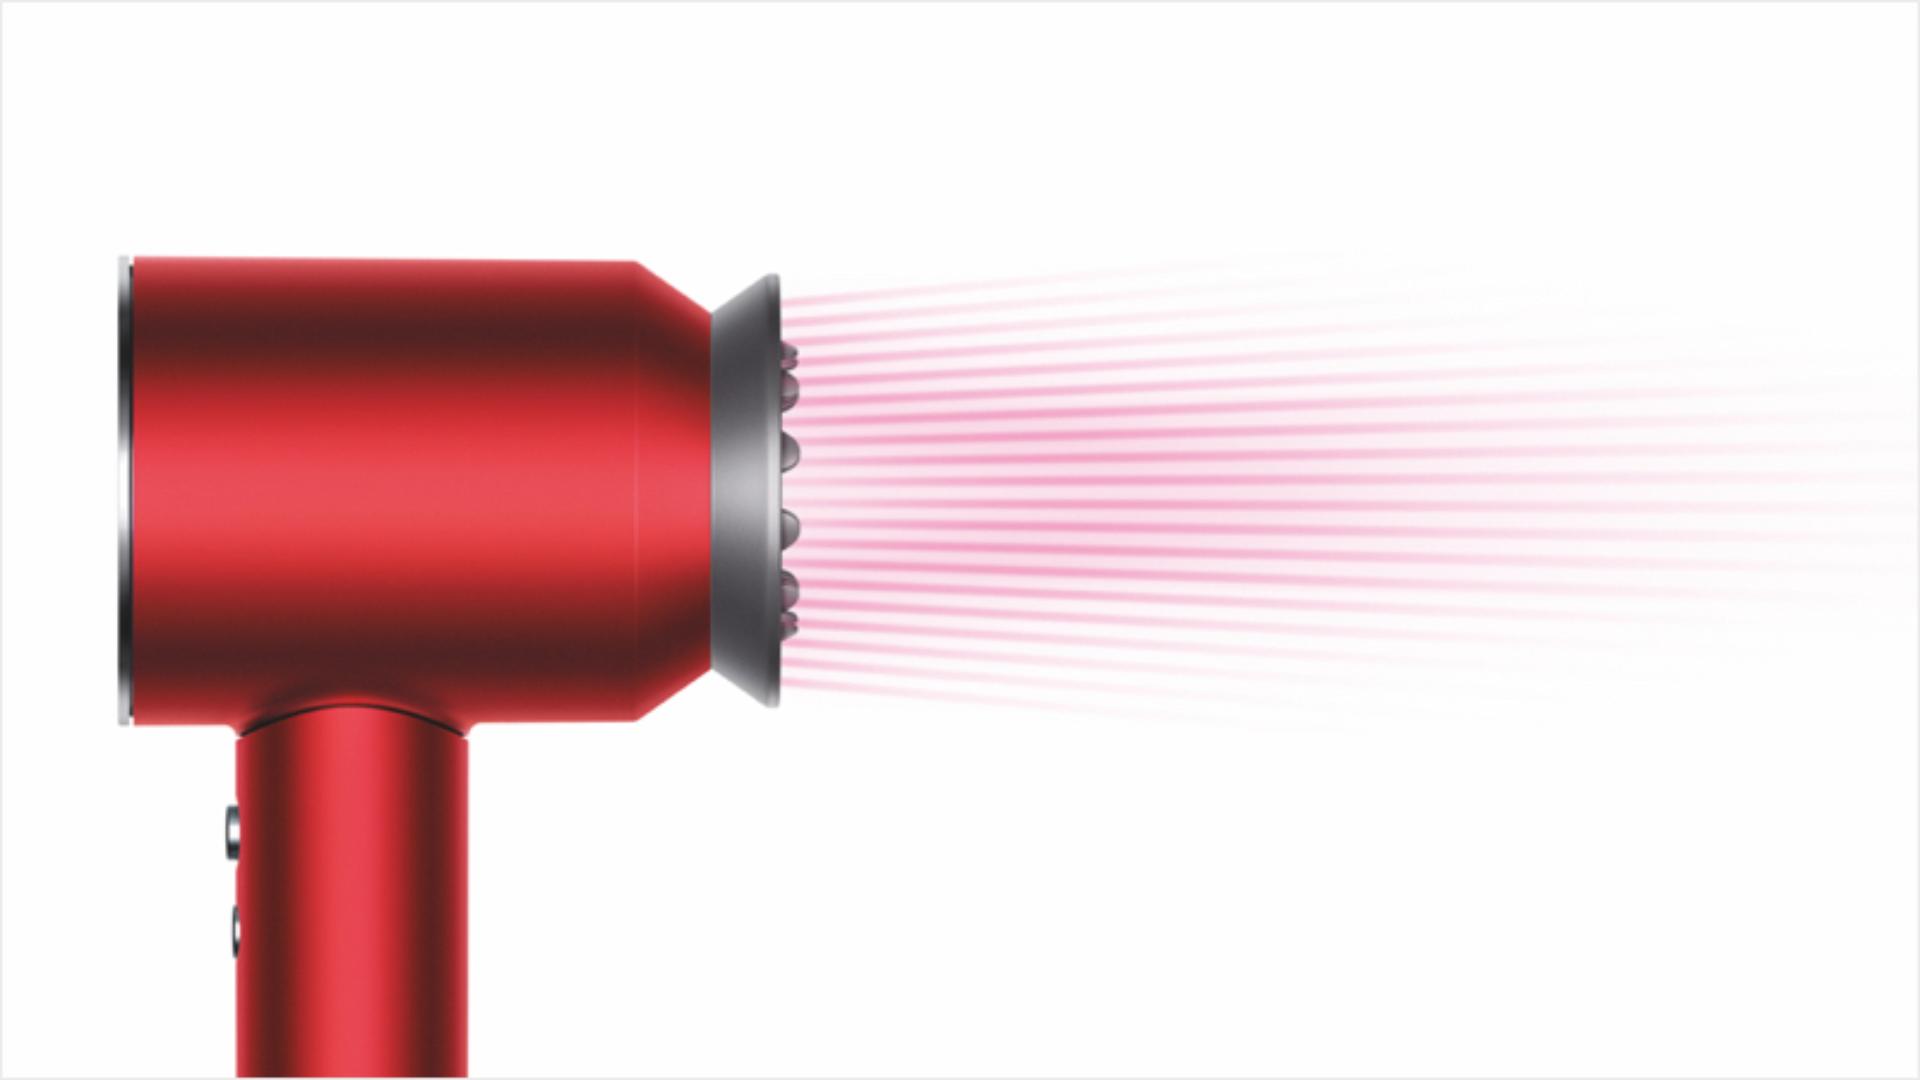 Dyson Supersonic™ hair dryer with New Gentle air attachment